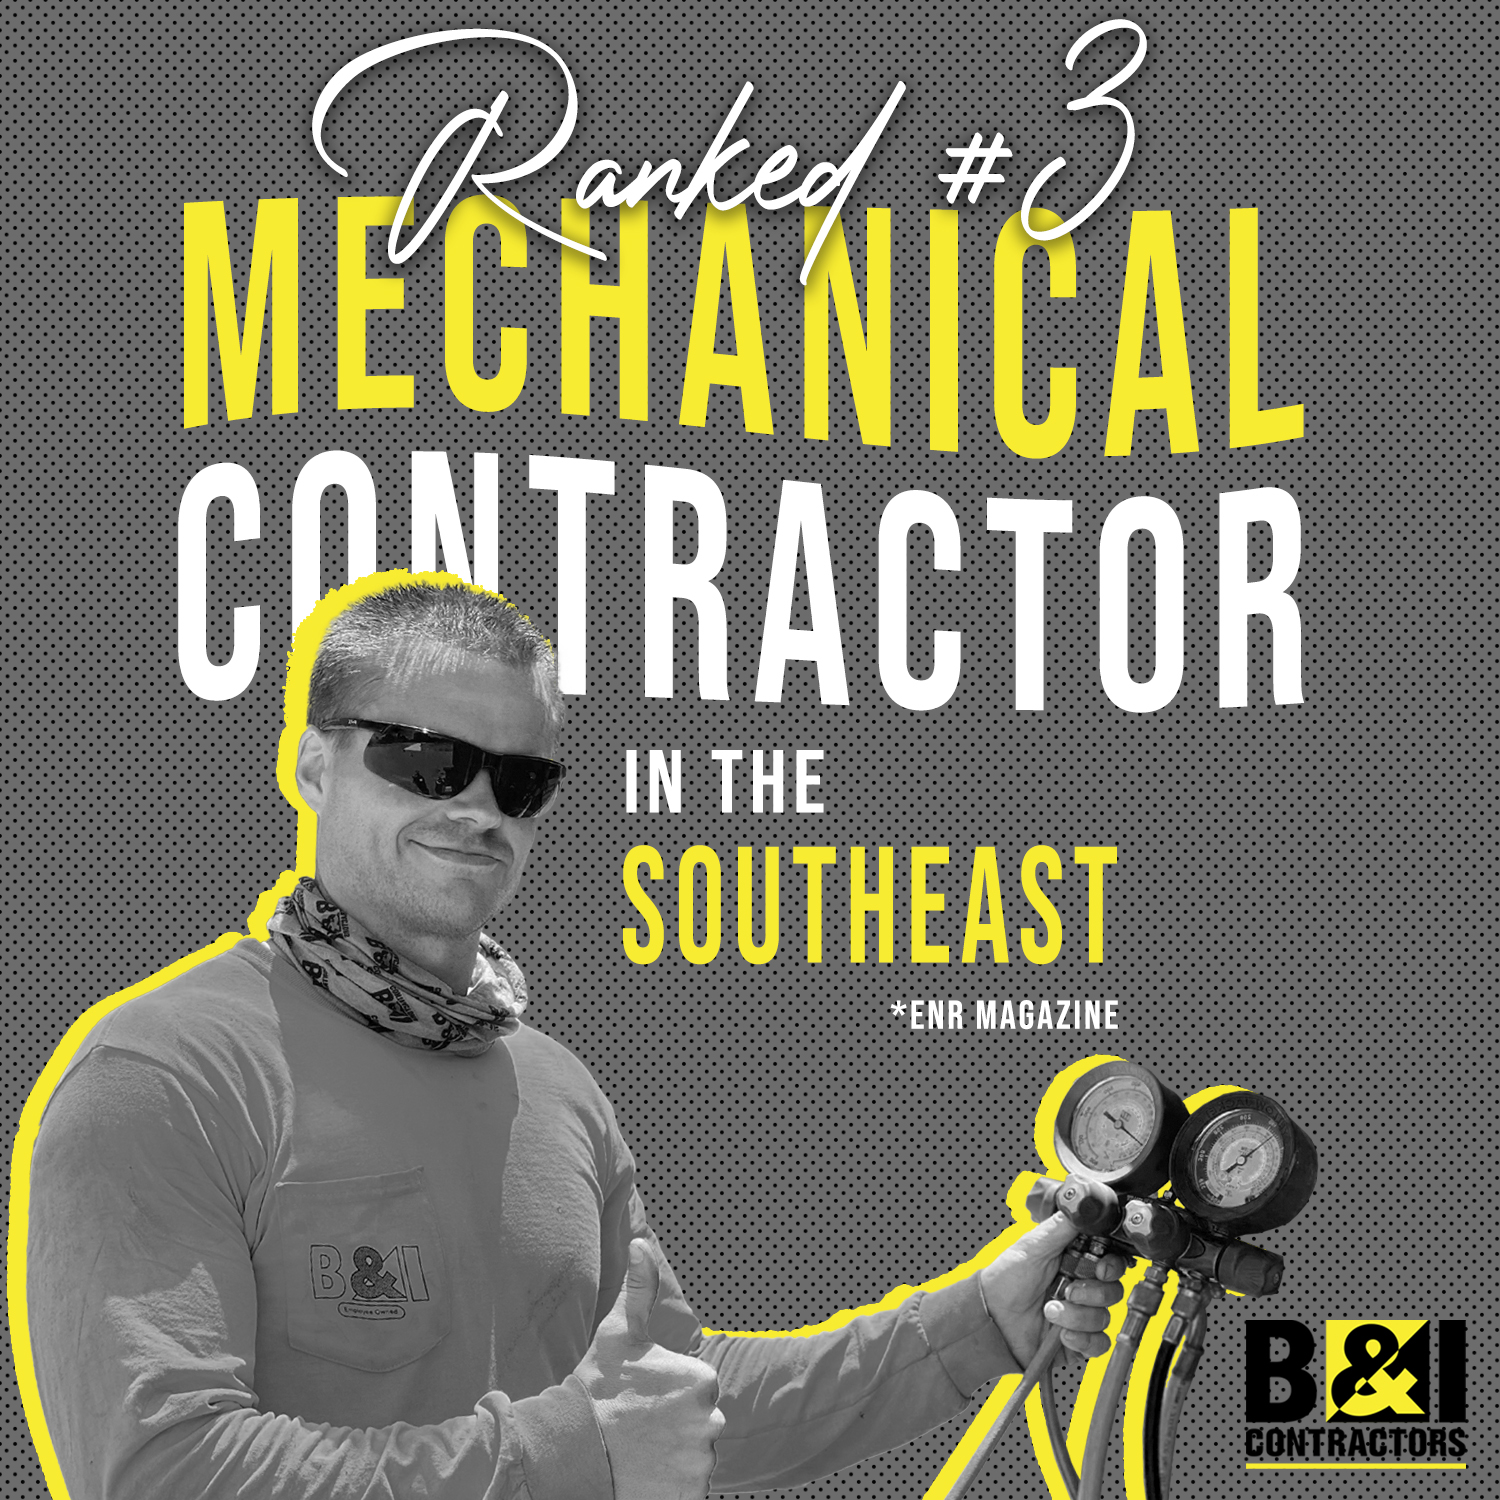 B&I Ranked 3 Mechanical Contractors in ENR Magazine